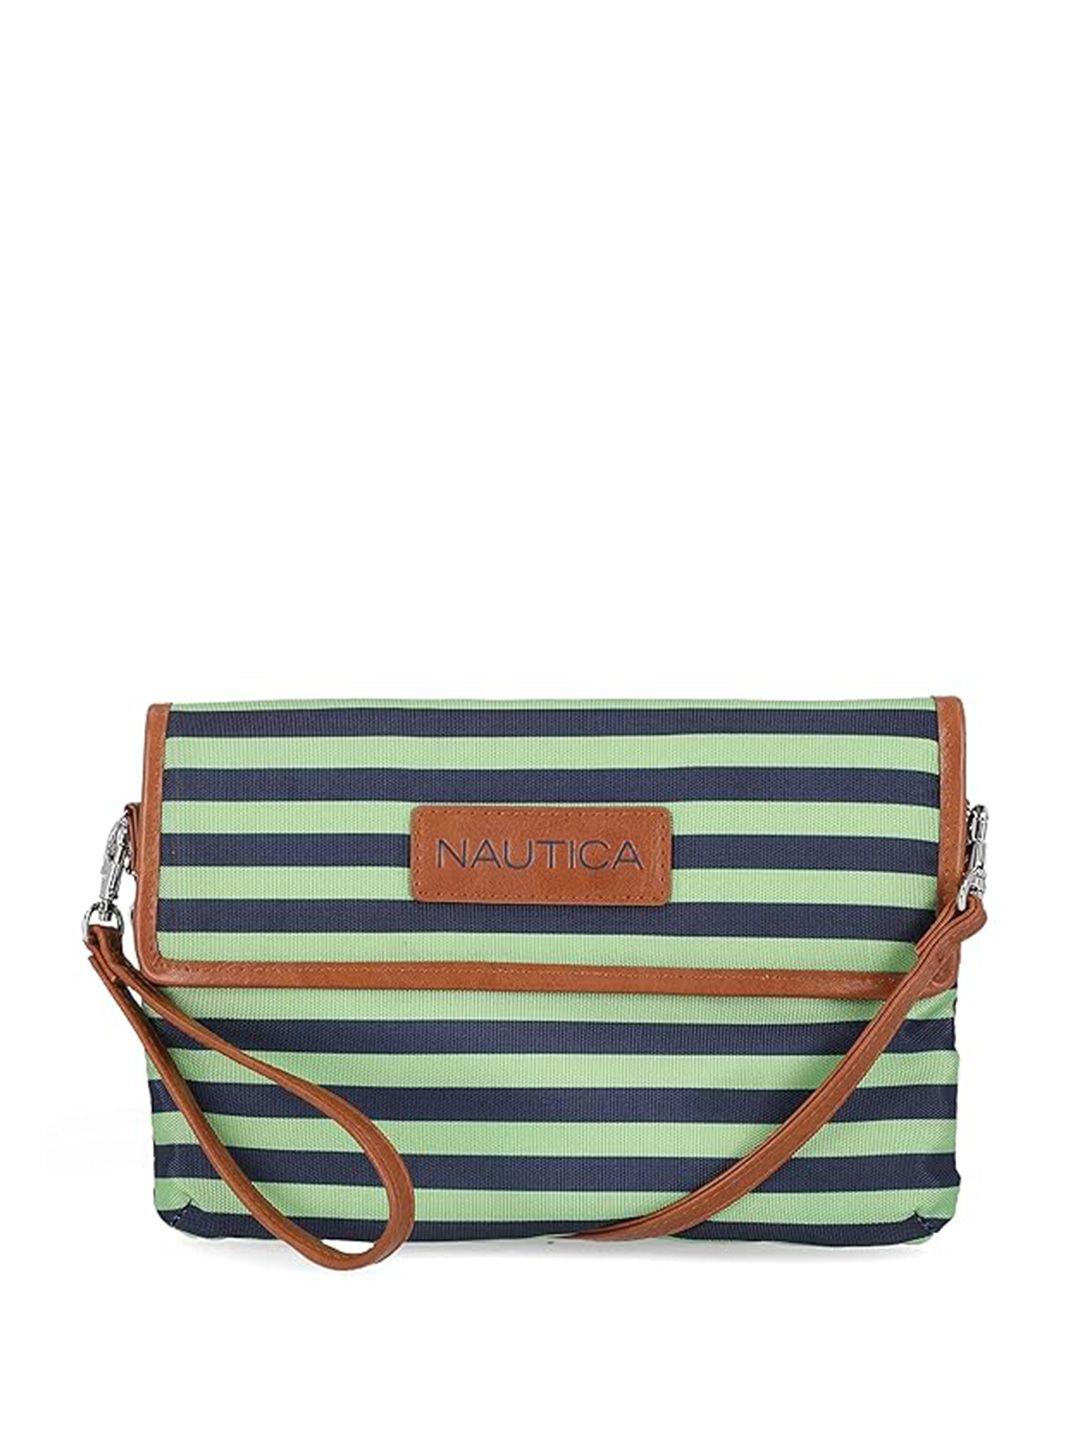 nautica striped structured sling bag